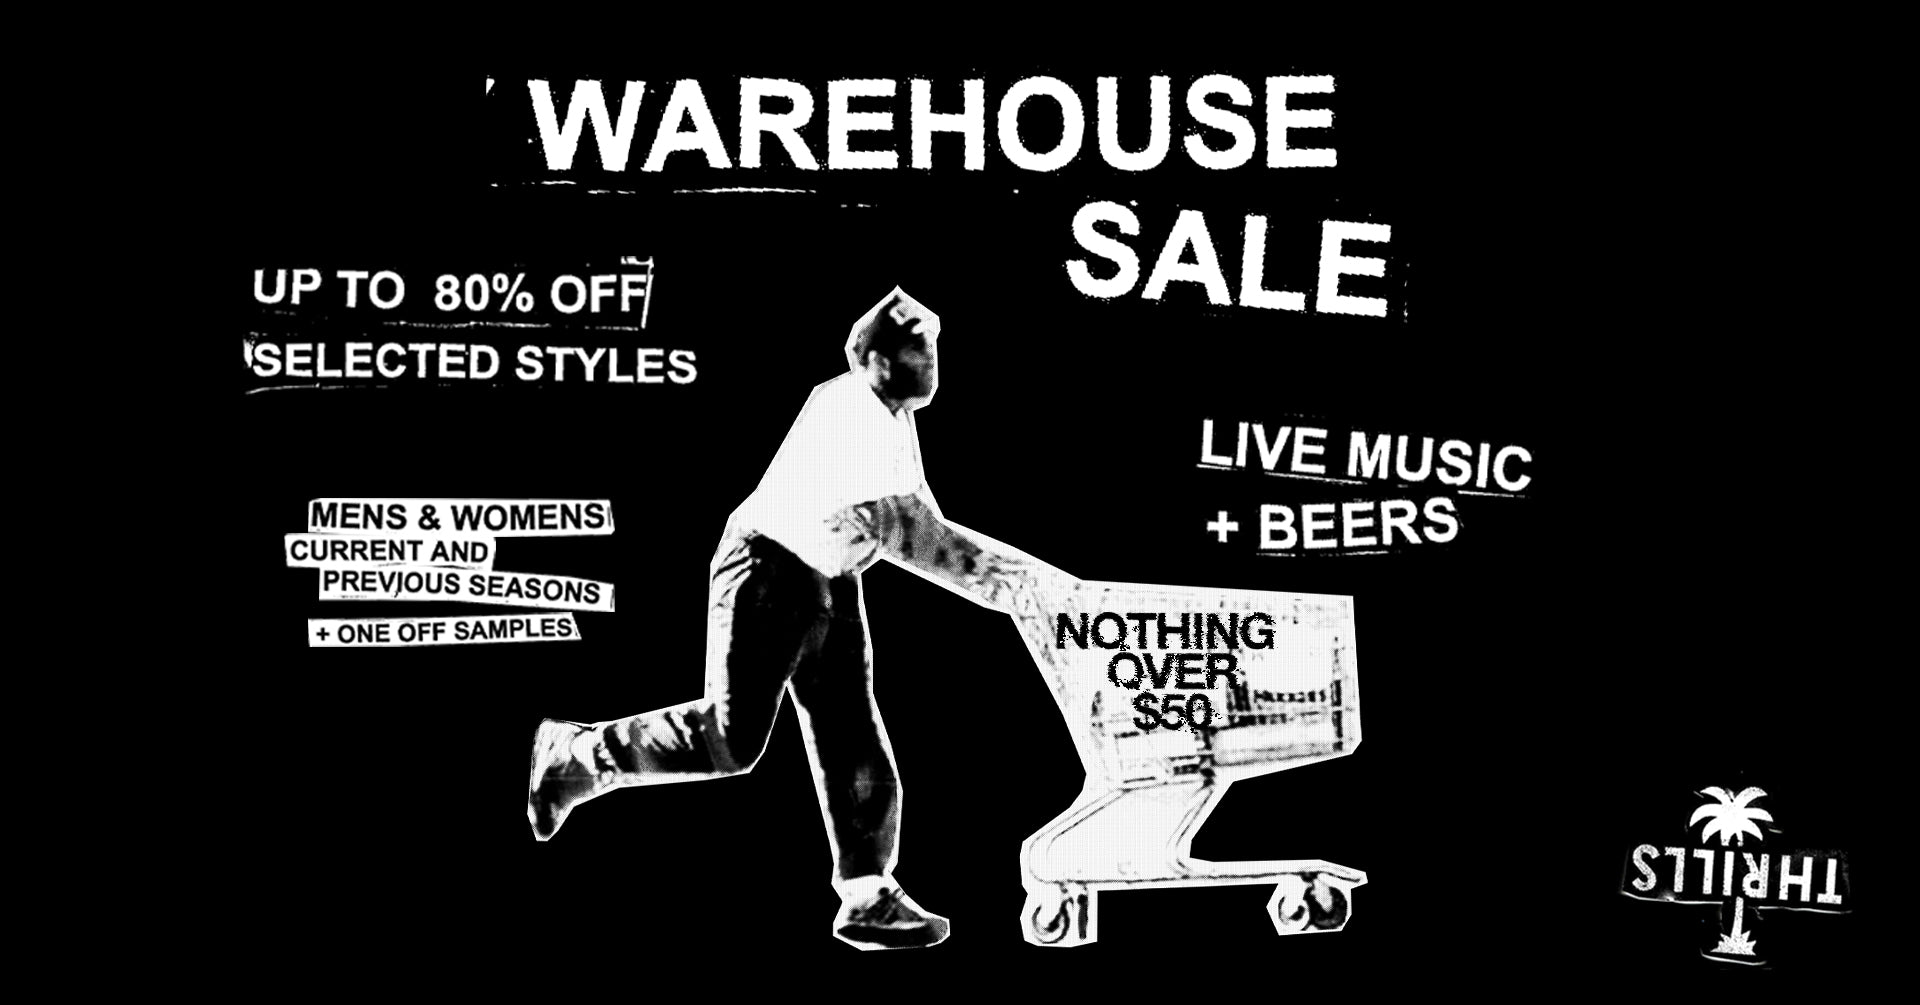 YOU'RE INVITED: THRILLS WAREHOUSE SALE